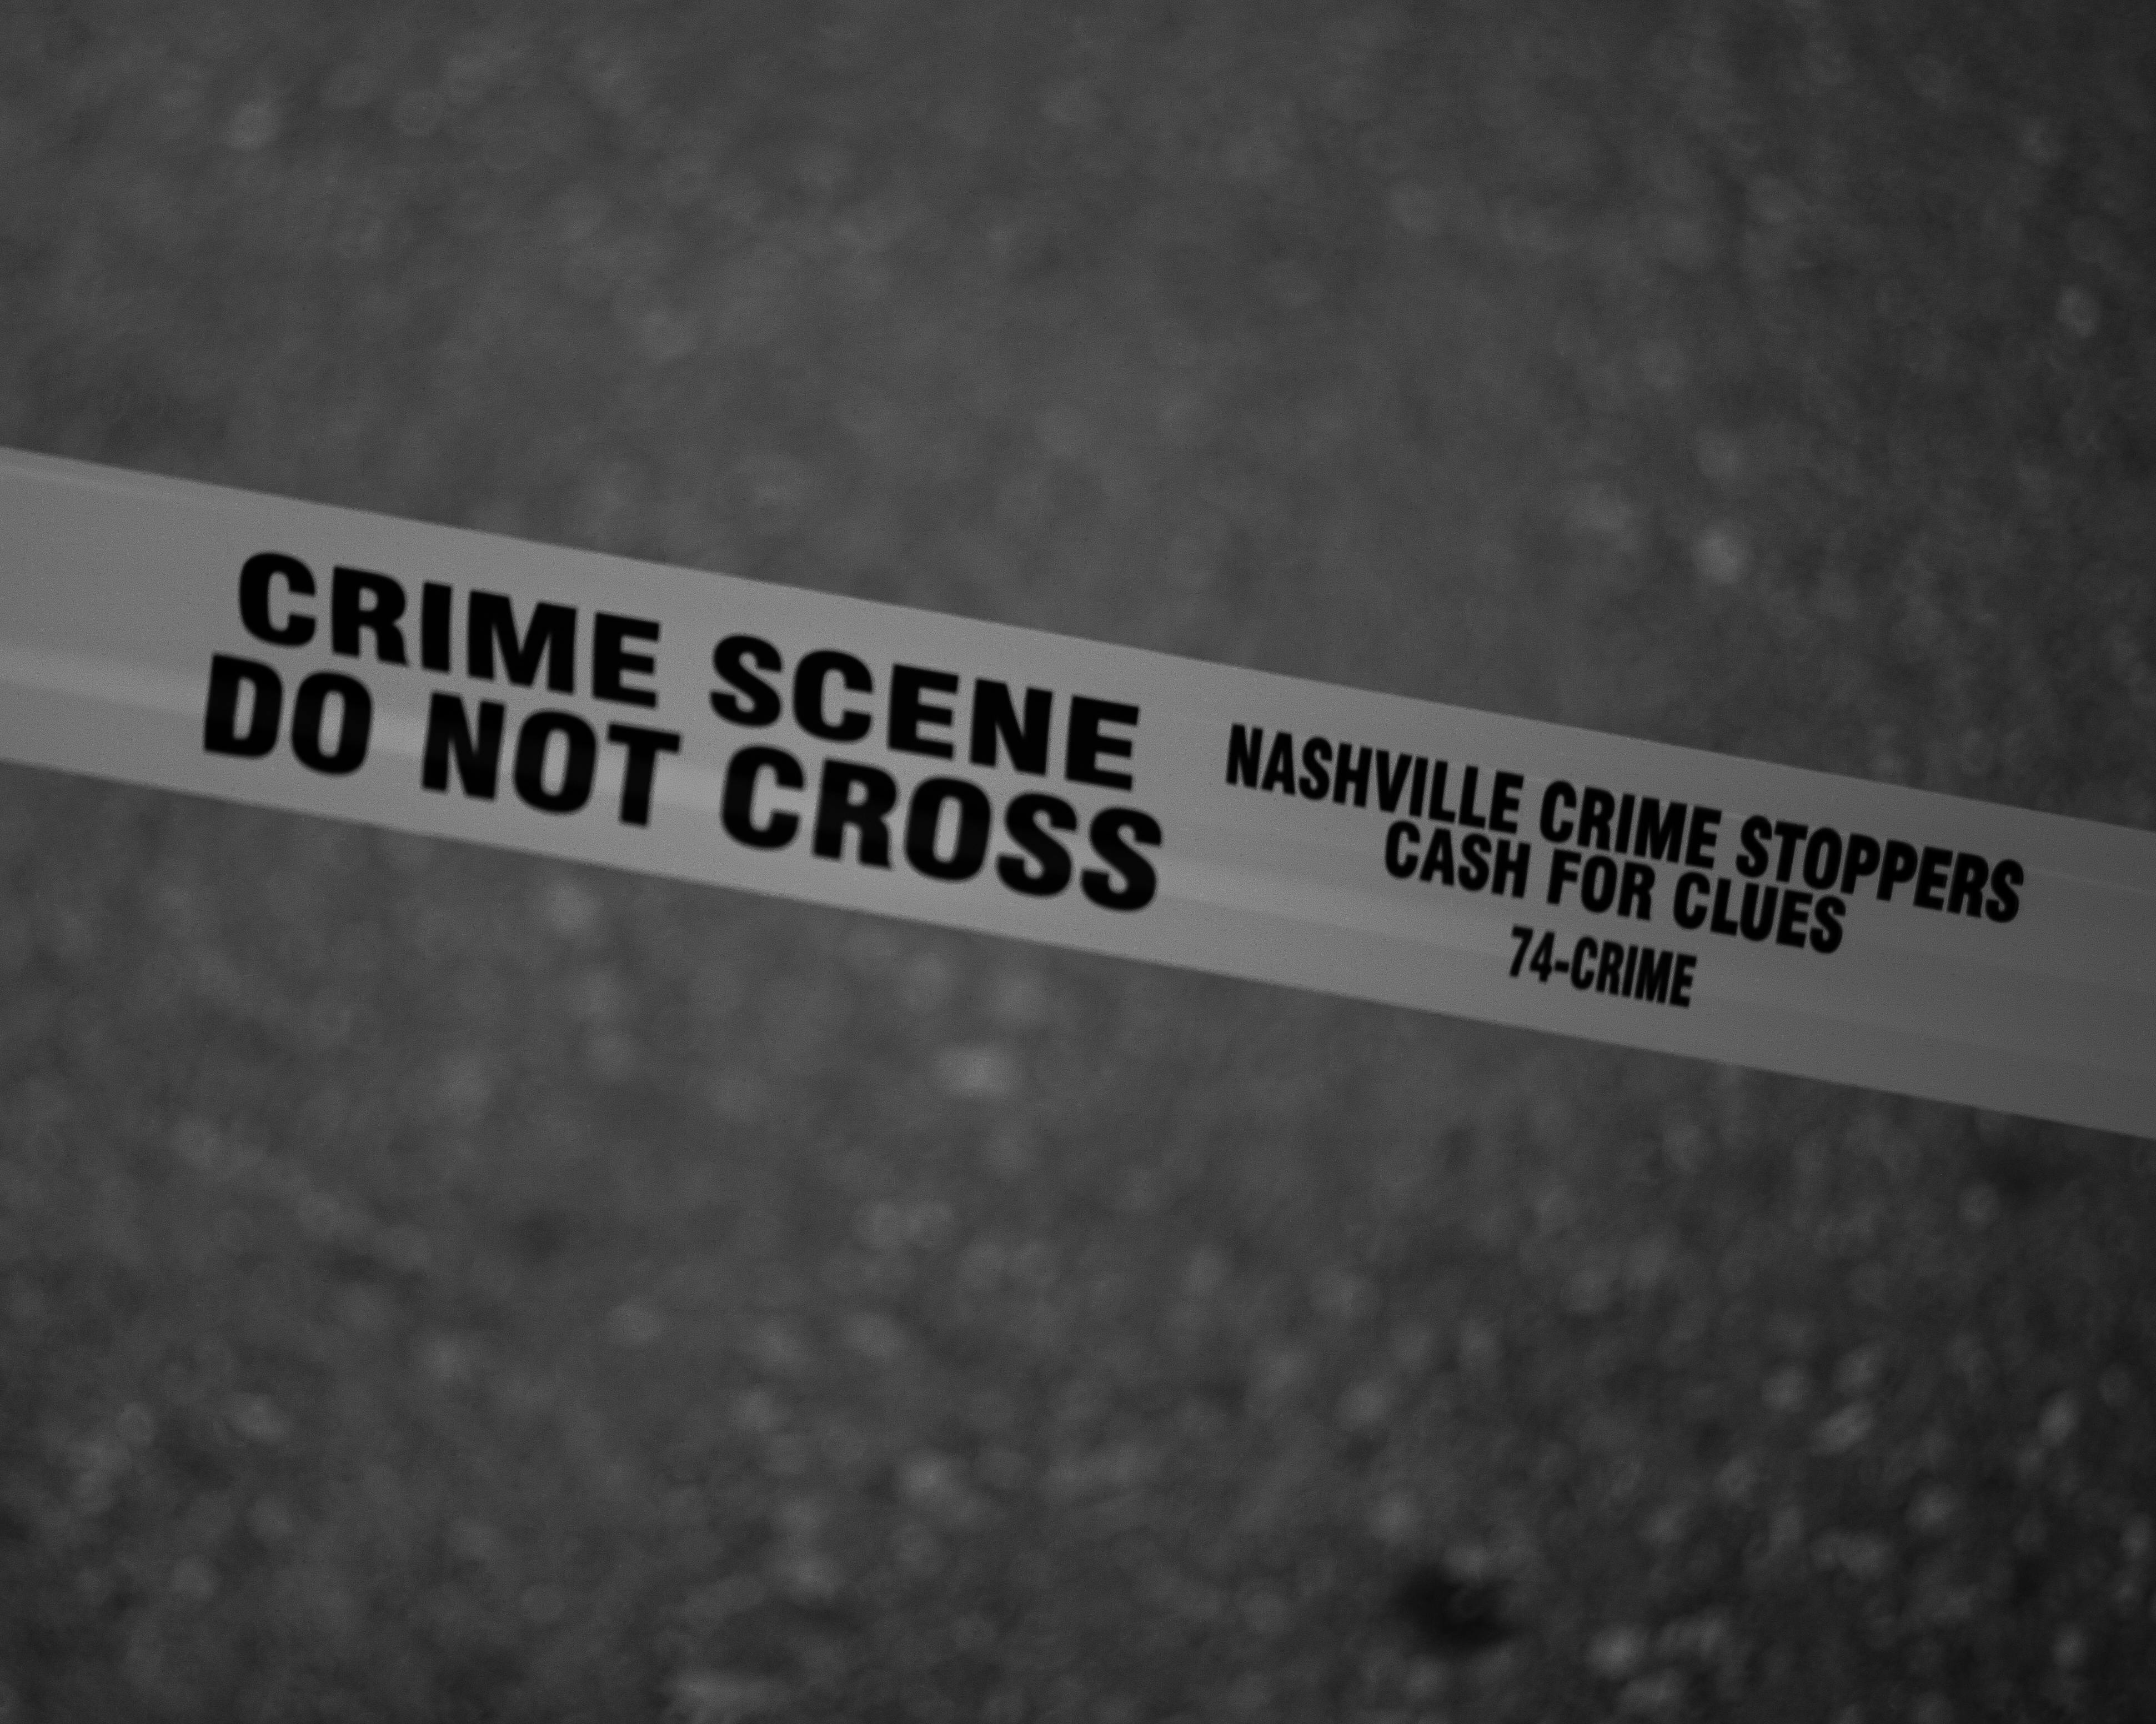 Crime Scene wallpaper by Sillymoooo  Download on ZEDGE  7dc5